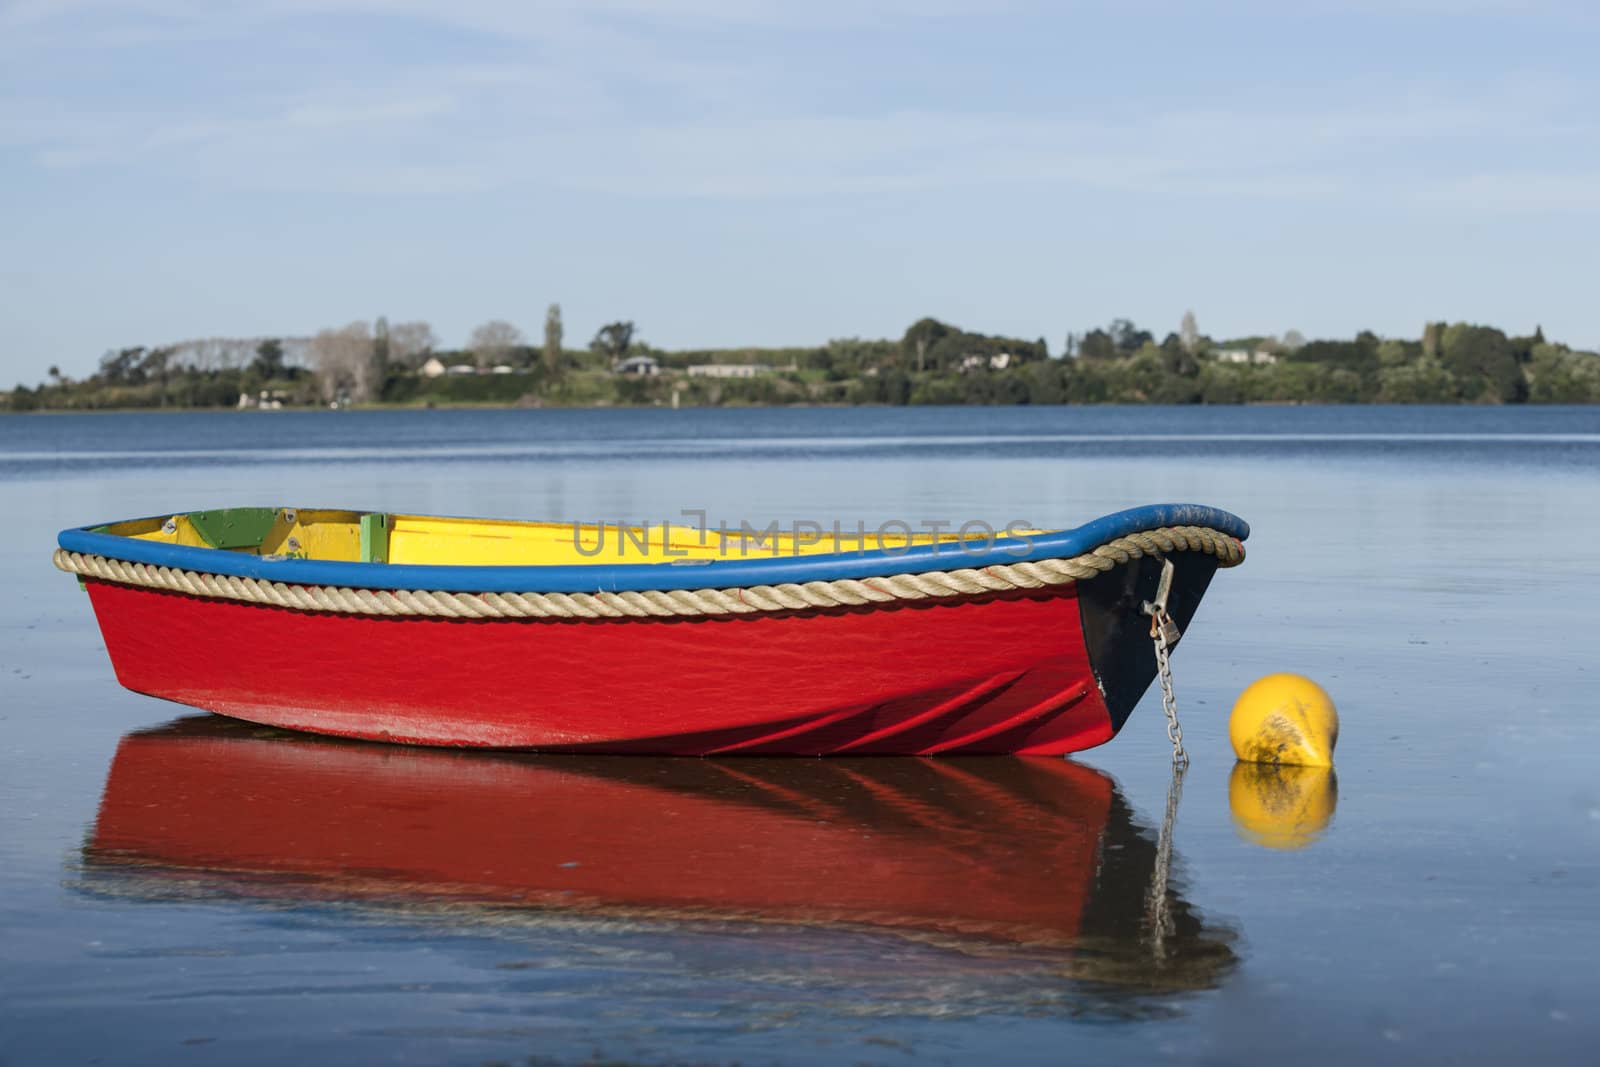 Bright red boat by brians101